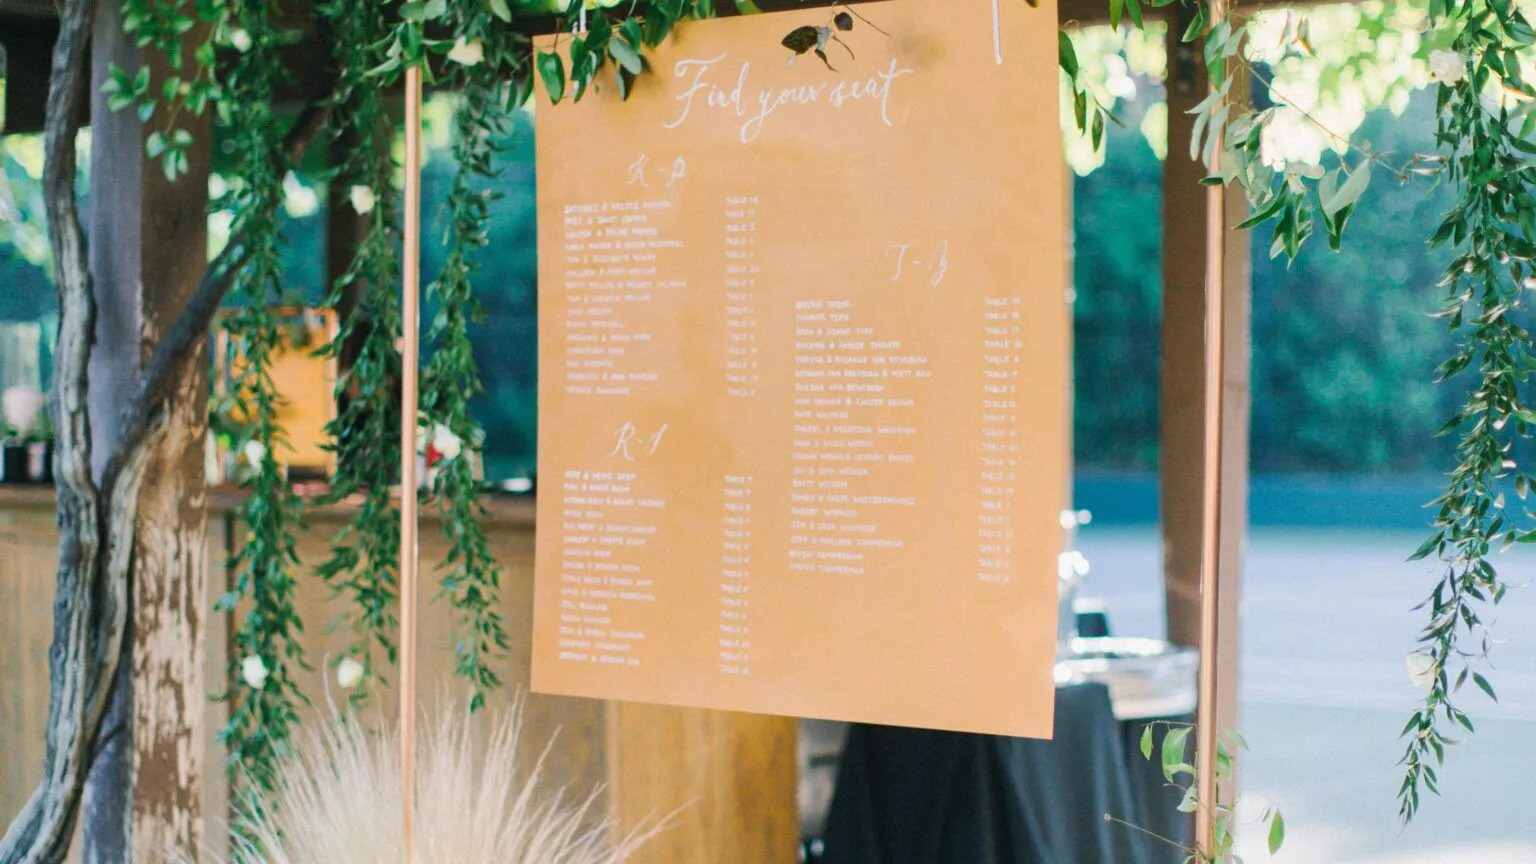 15 Gorgeous Wedding Seating Chart Designs for Your Big Day